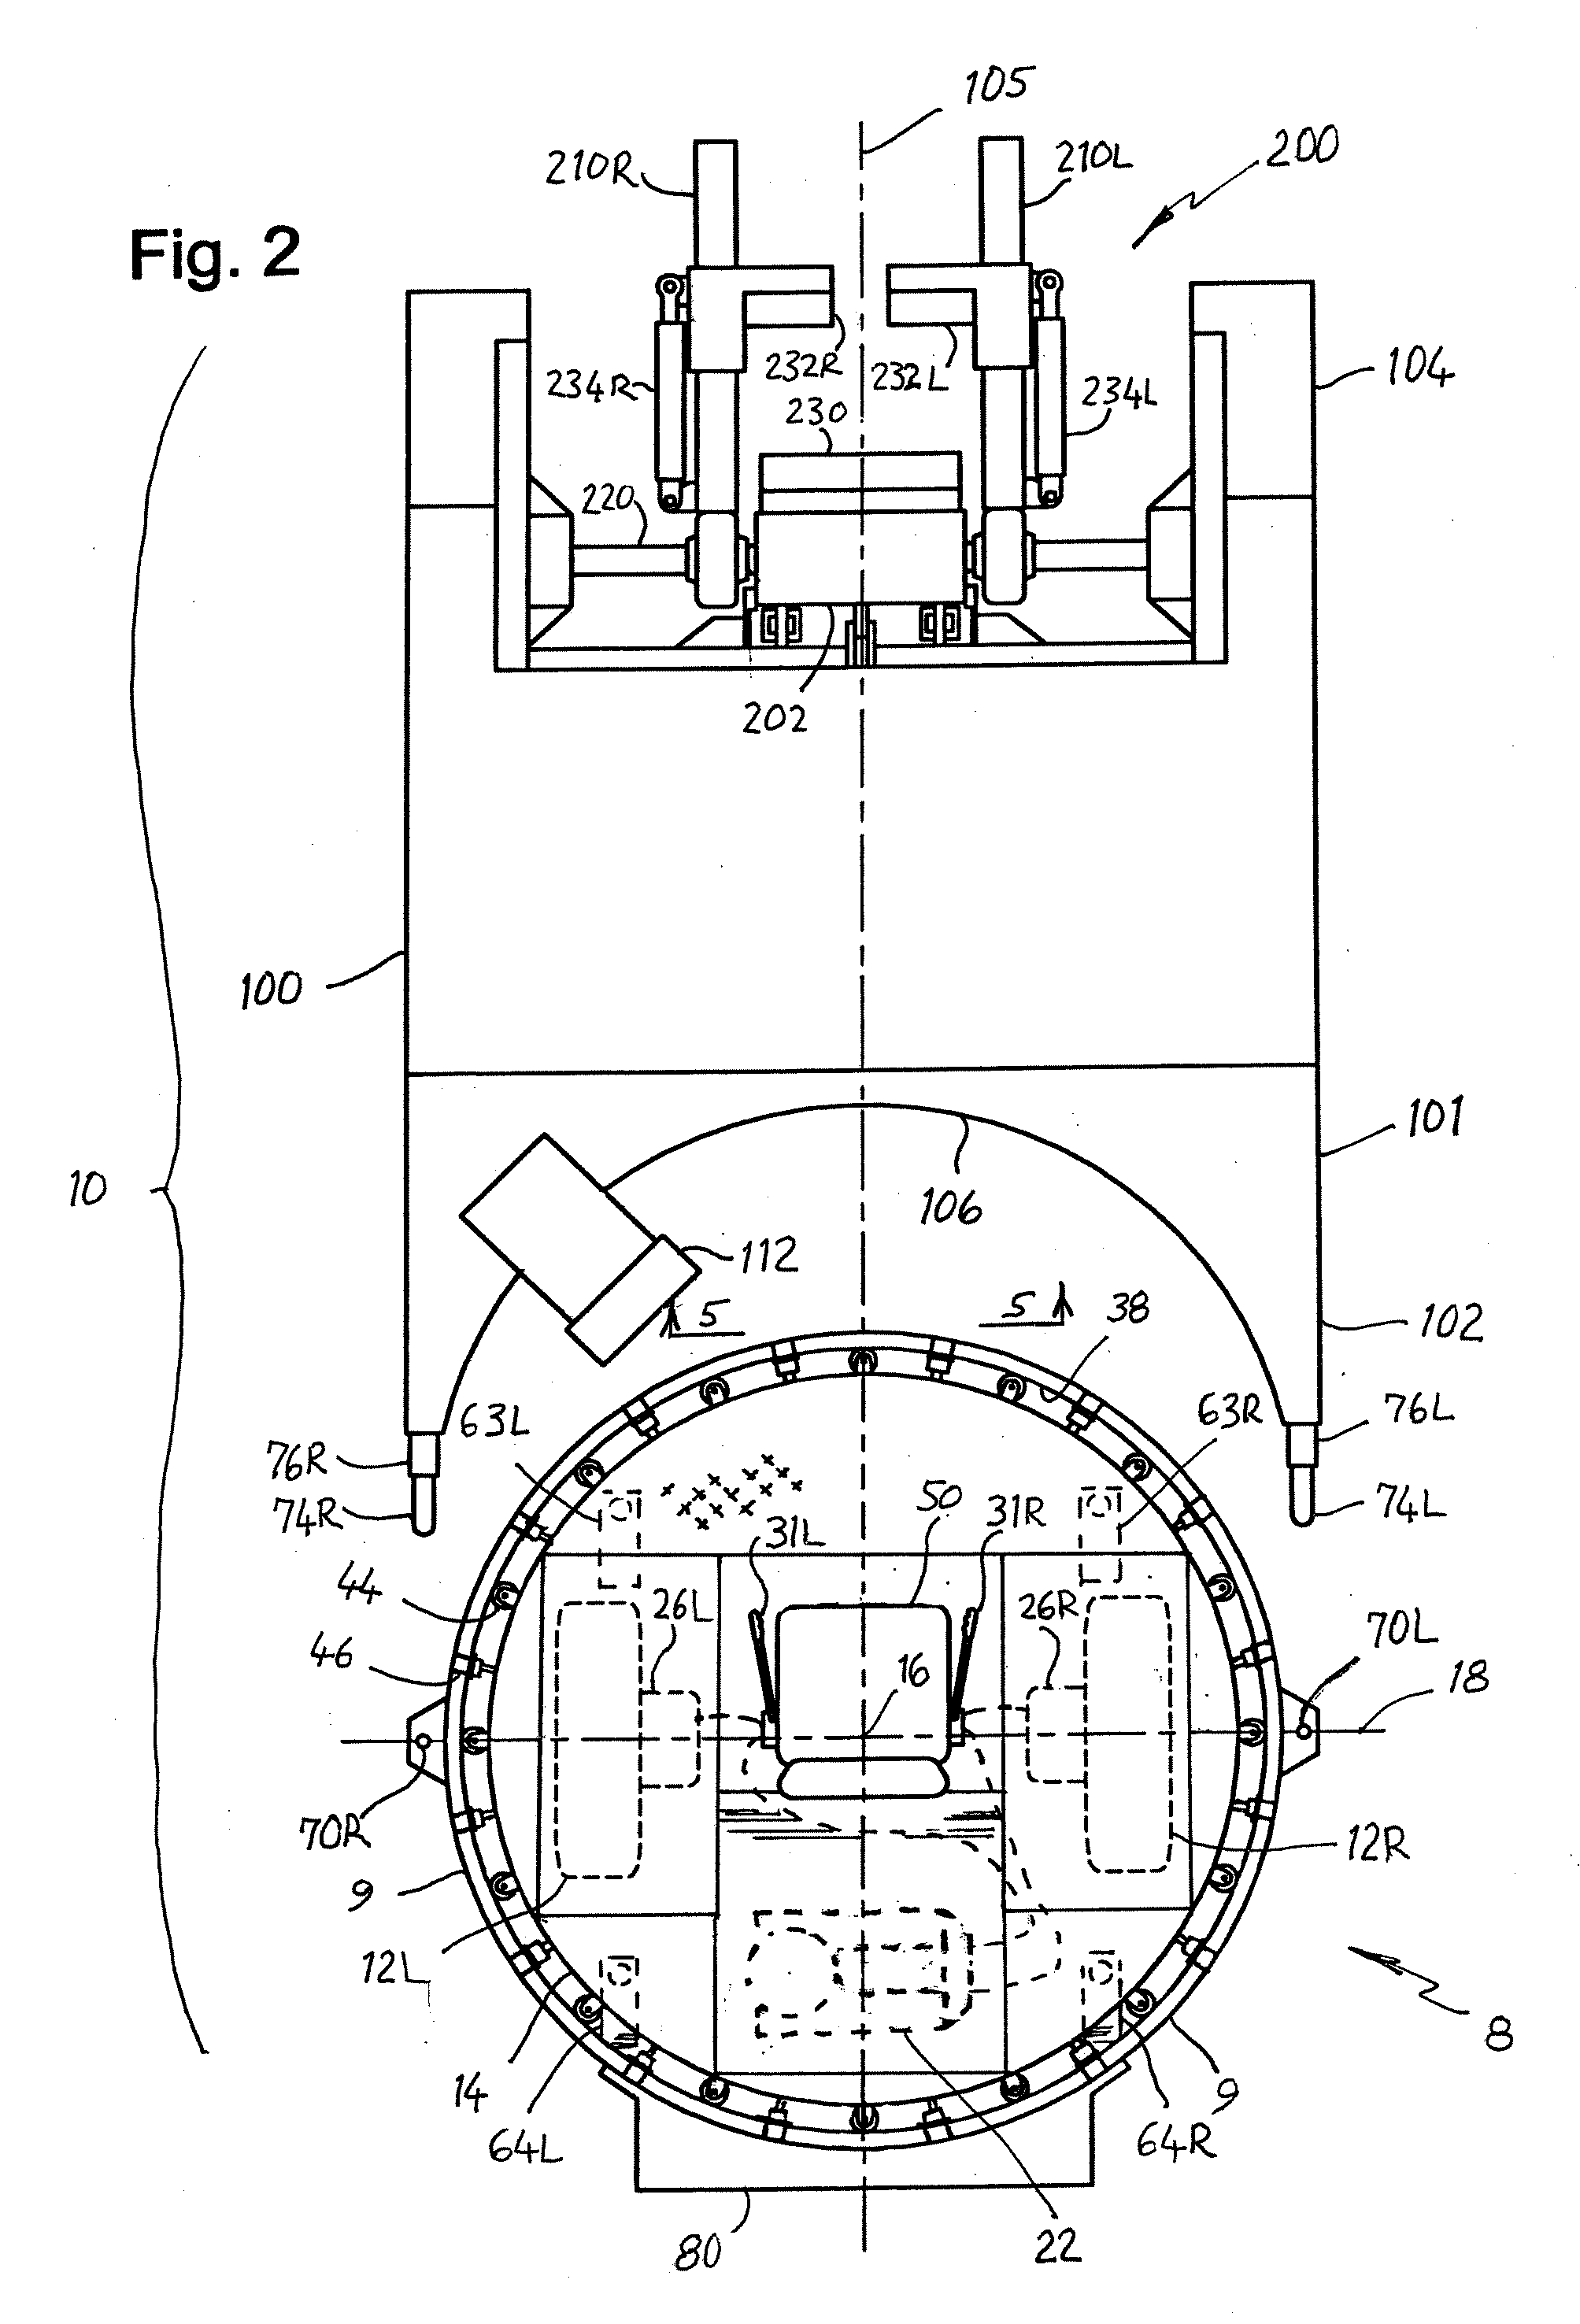 Omni-Directional Towbarless Aircraft Transporter and Method for Moving Aircraft